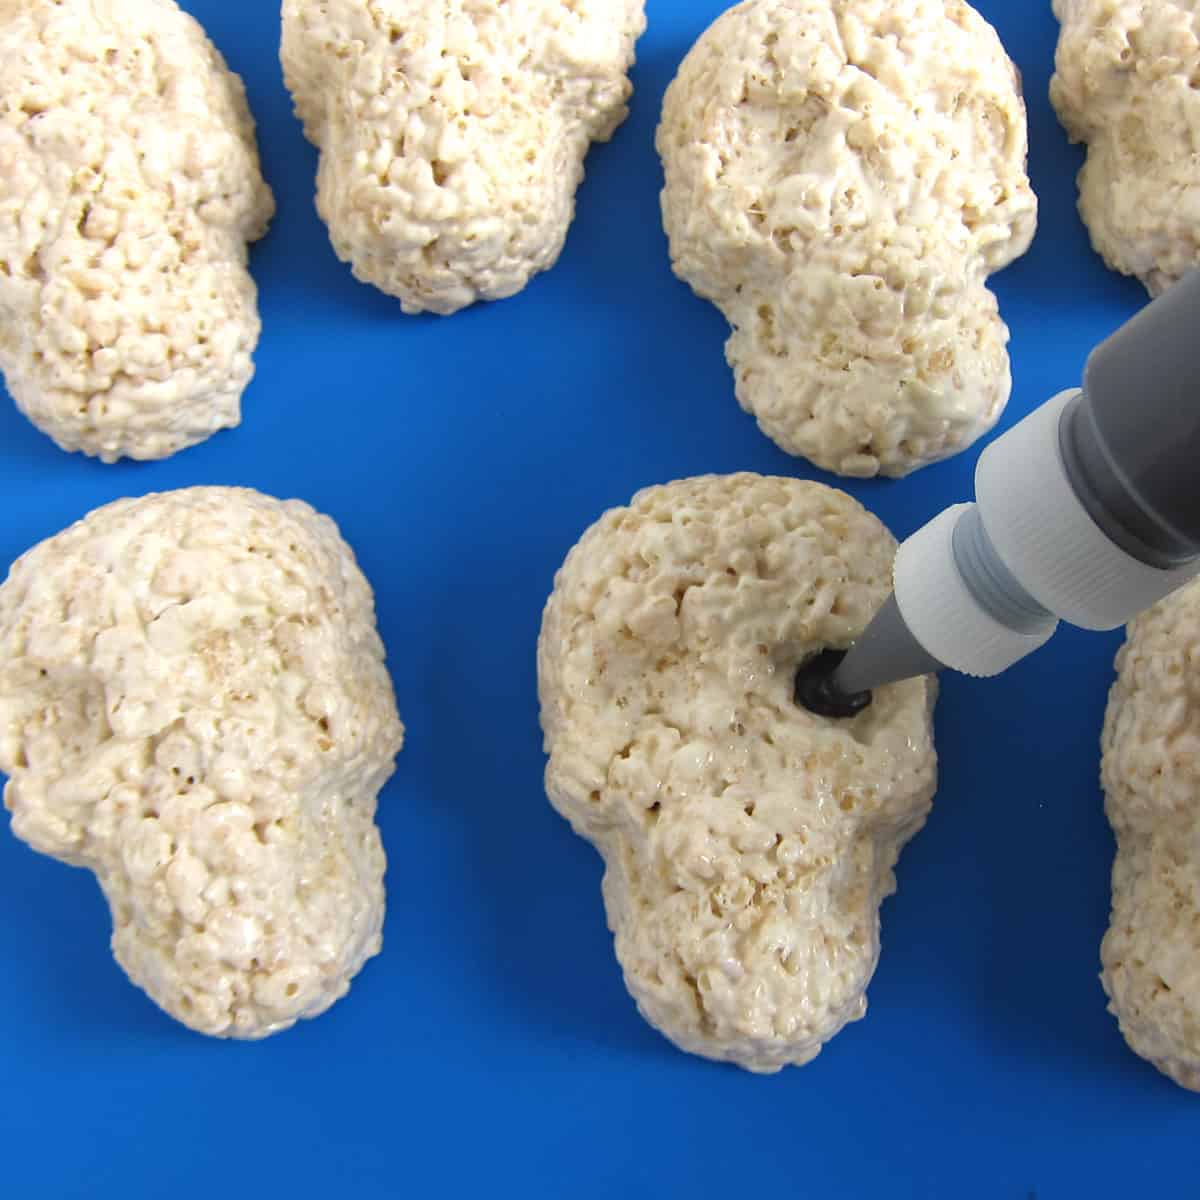 piping black candy melts into the sunken eye cavity in the rice crispy treat skull.